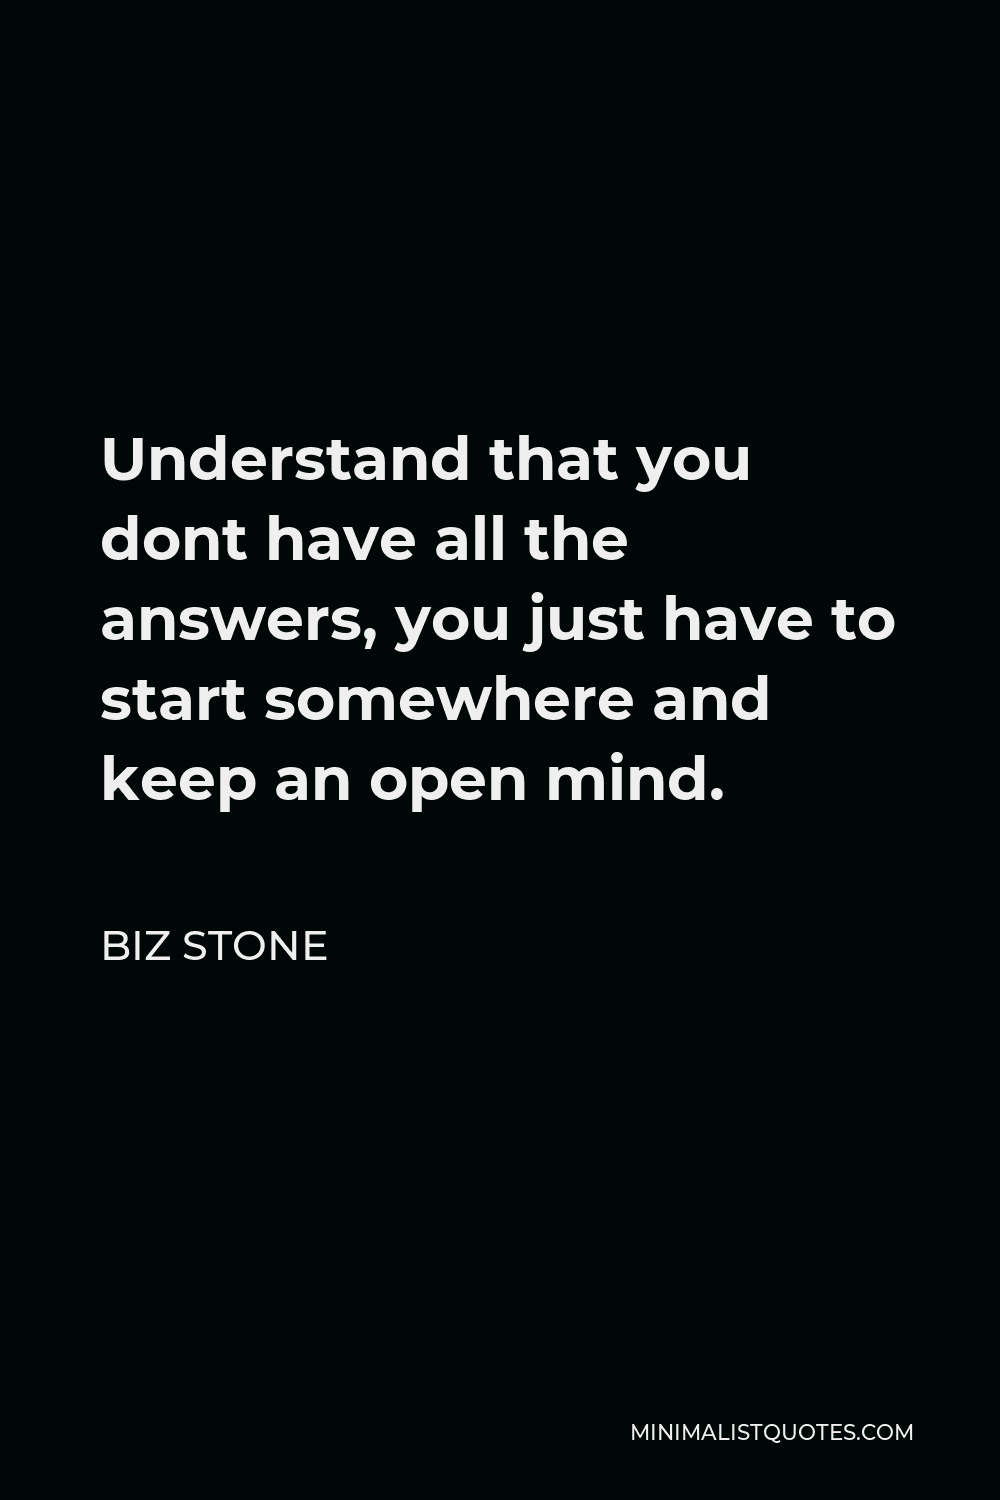 Biz Stone Quote - Understand that you dont have all the answers, you just have to start somewhere and keep an open mind.